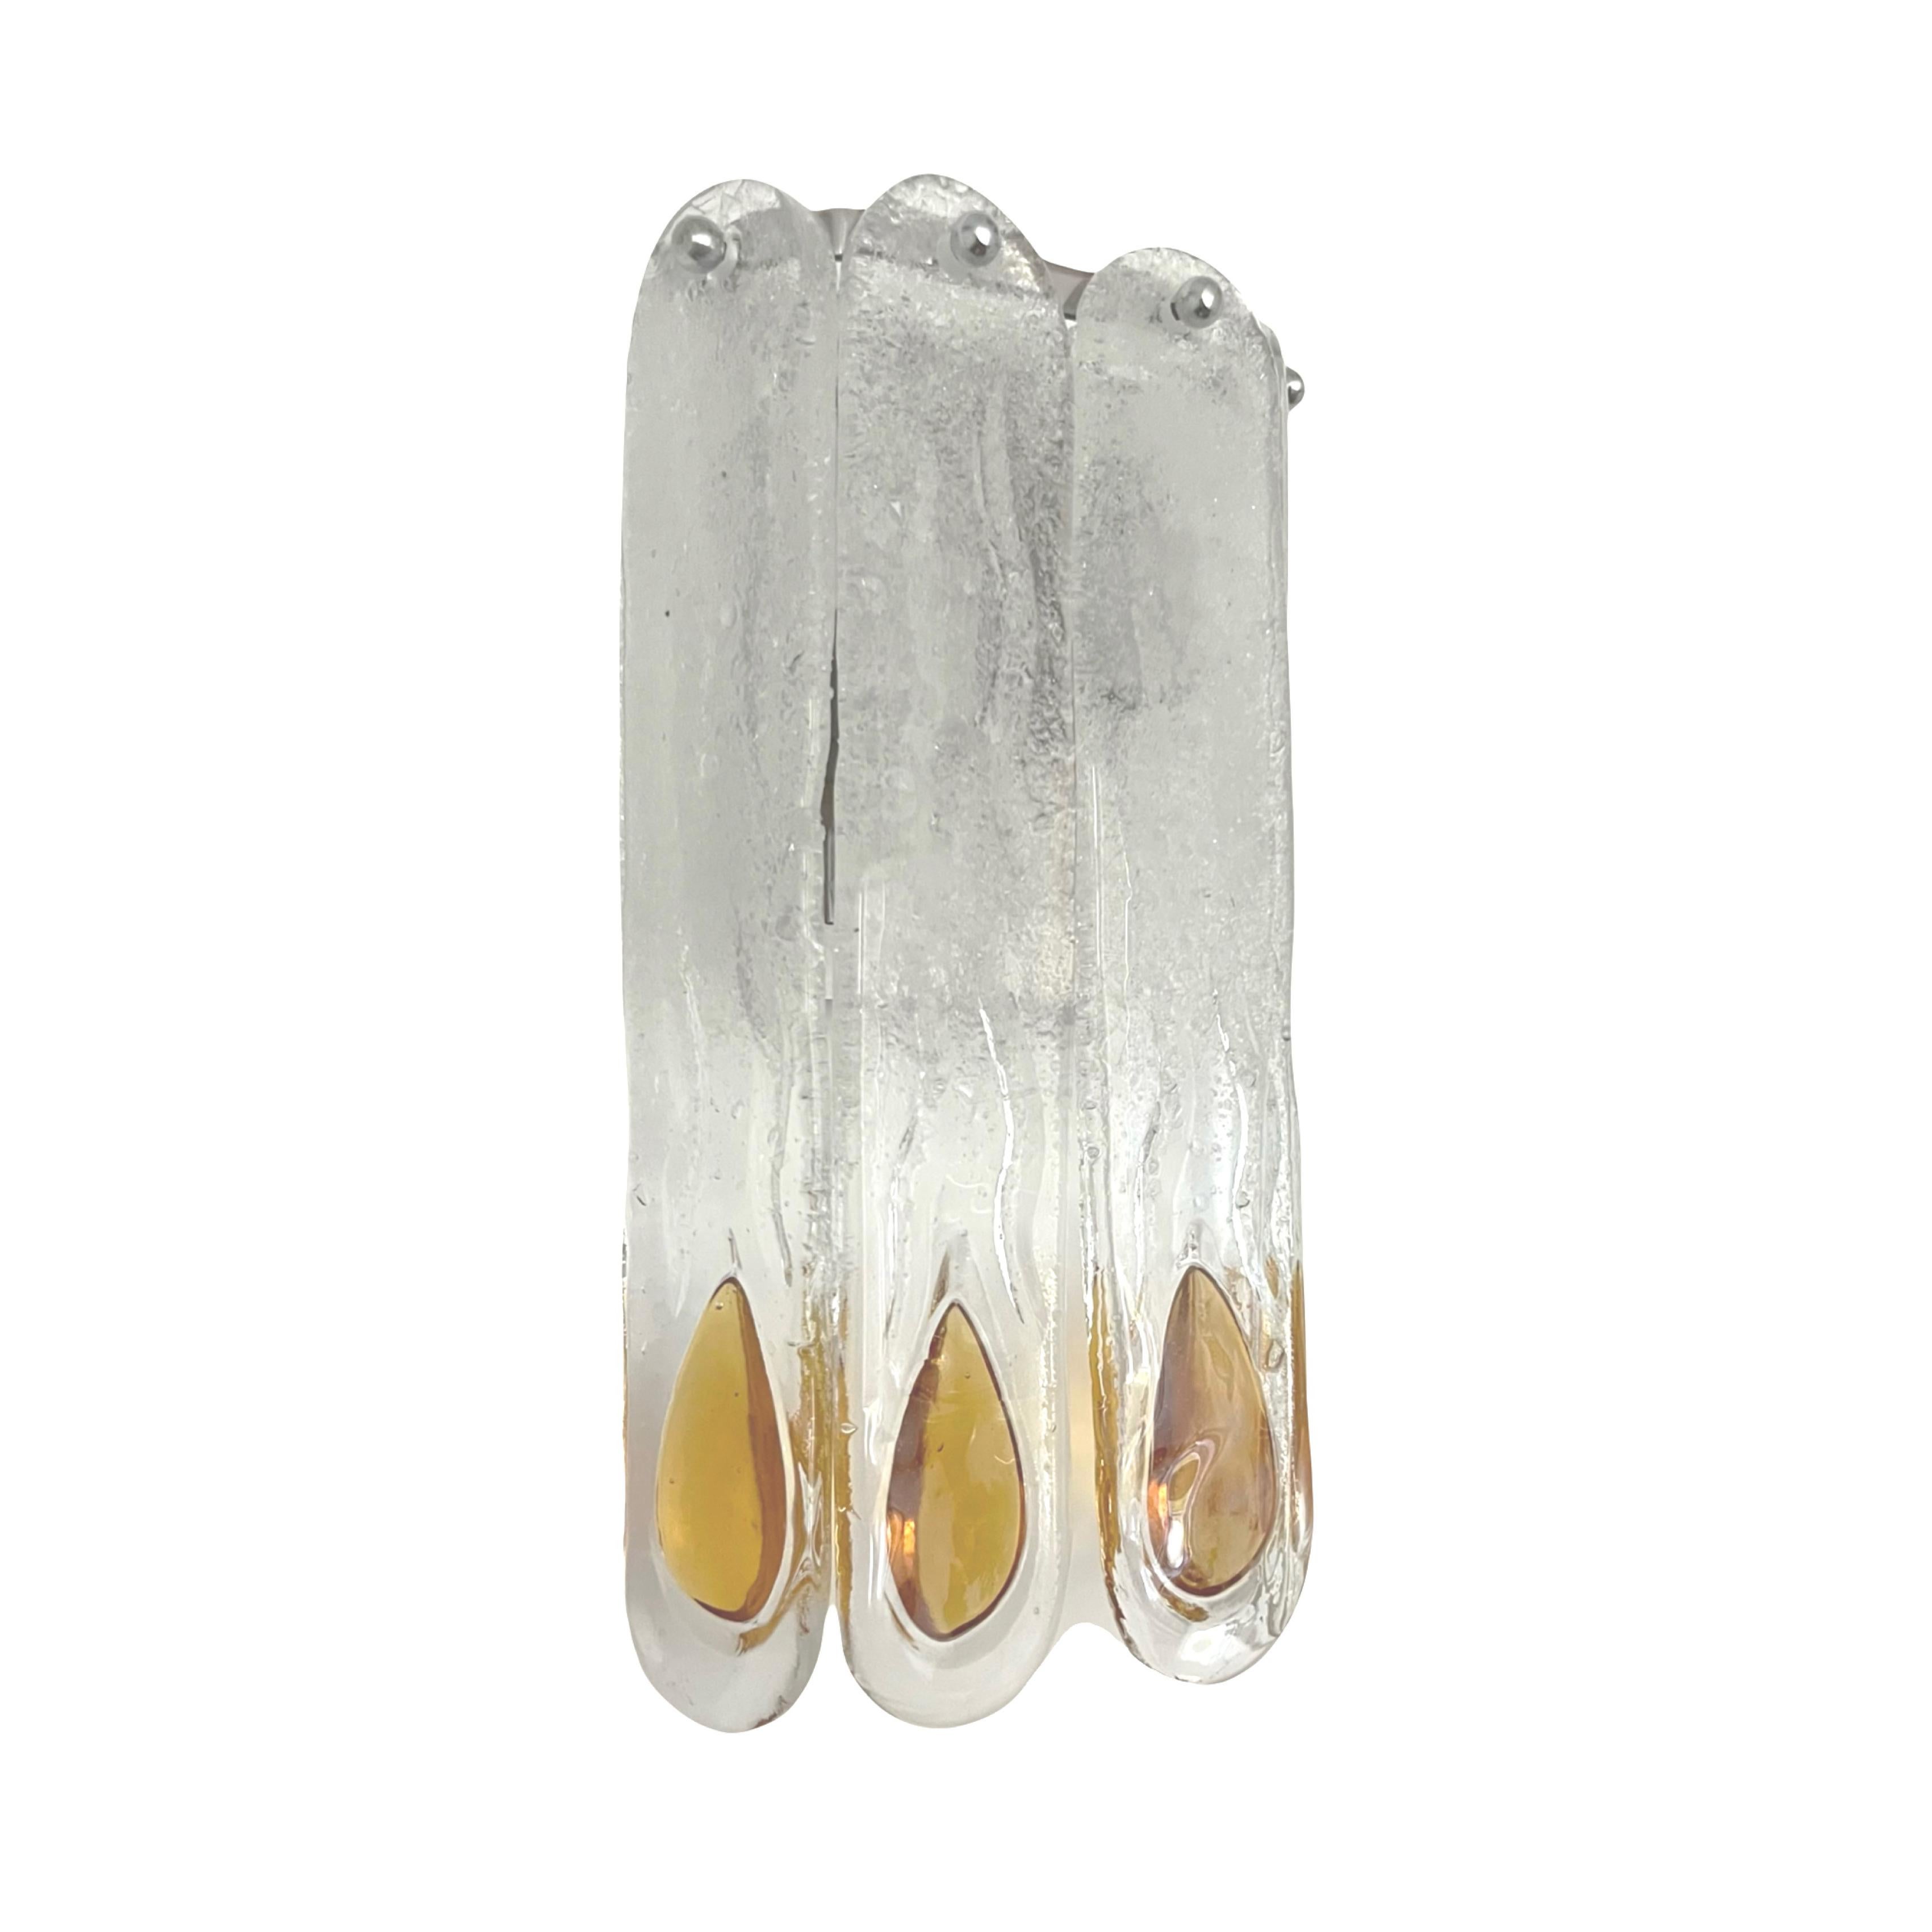 Pretty and beauty Italian Pair of Amber Clear Murano glass Wall Sconces. These fixtures were designed and manufactured during the 1970s in Italy by Mazzega.
Mazzega lie in the noble Venetian glassworking tradition; the firm was founded Angelo